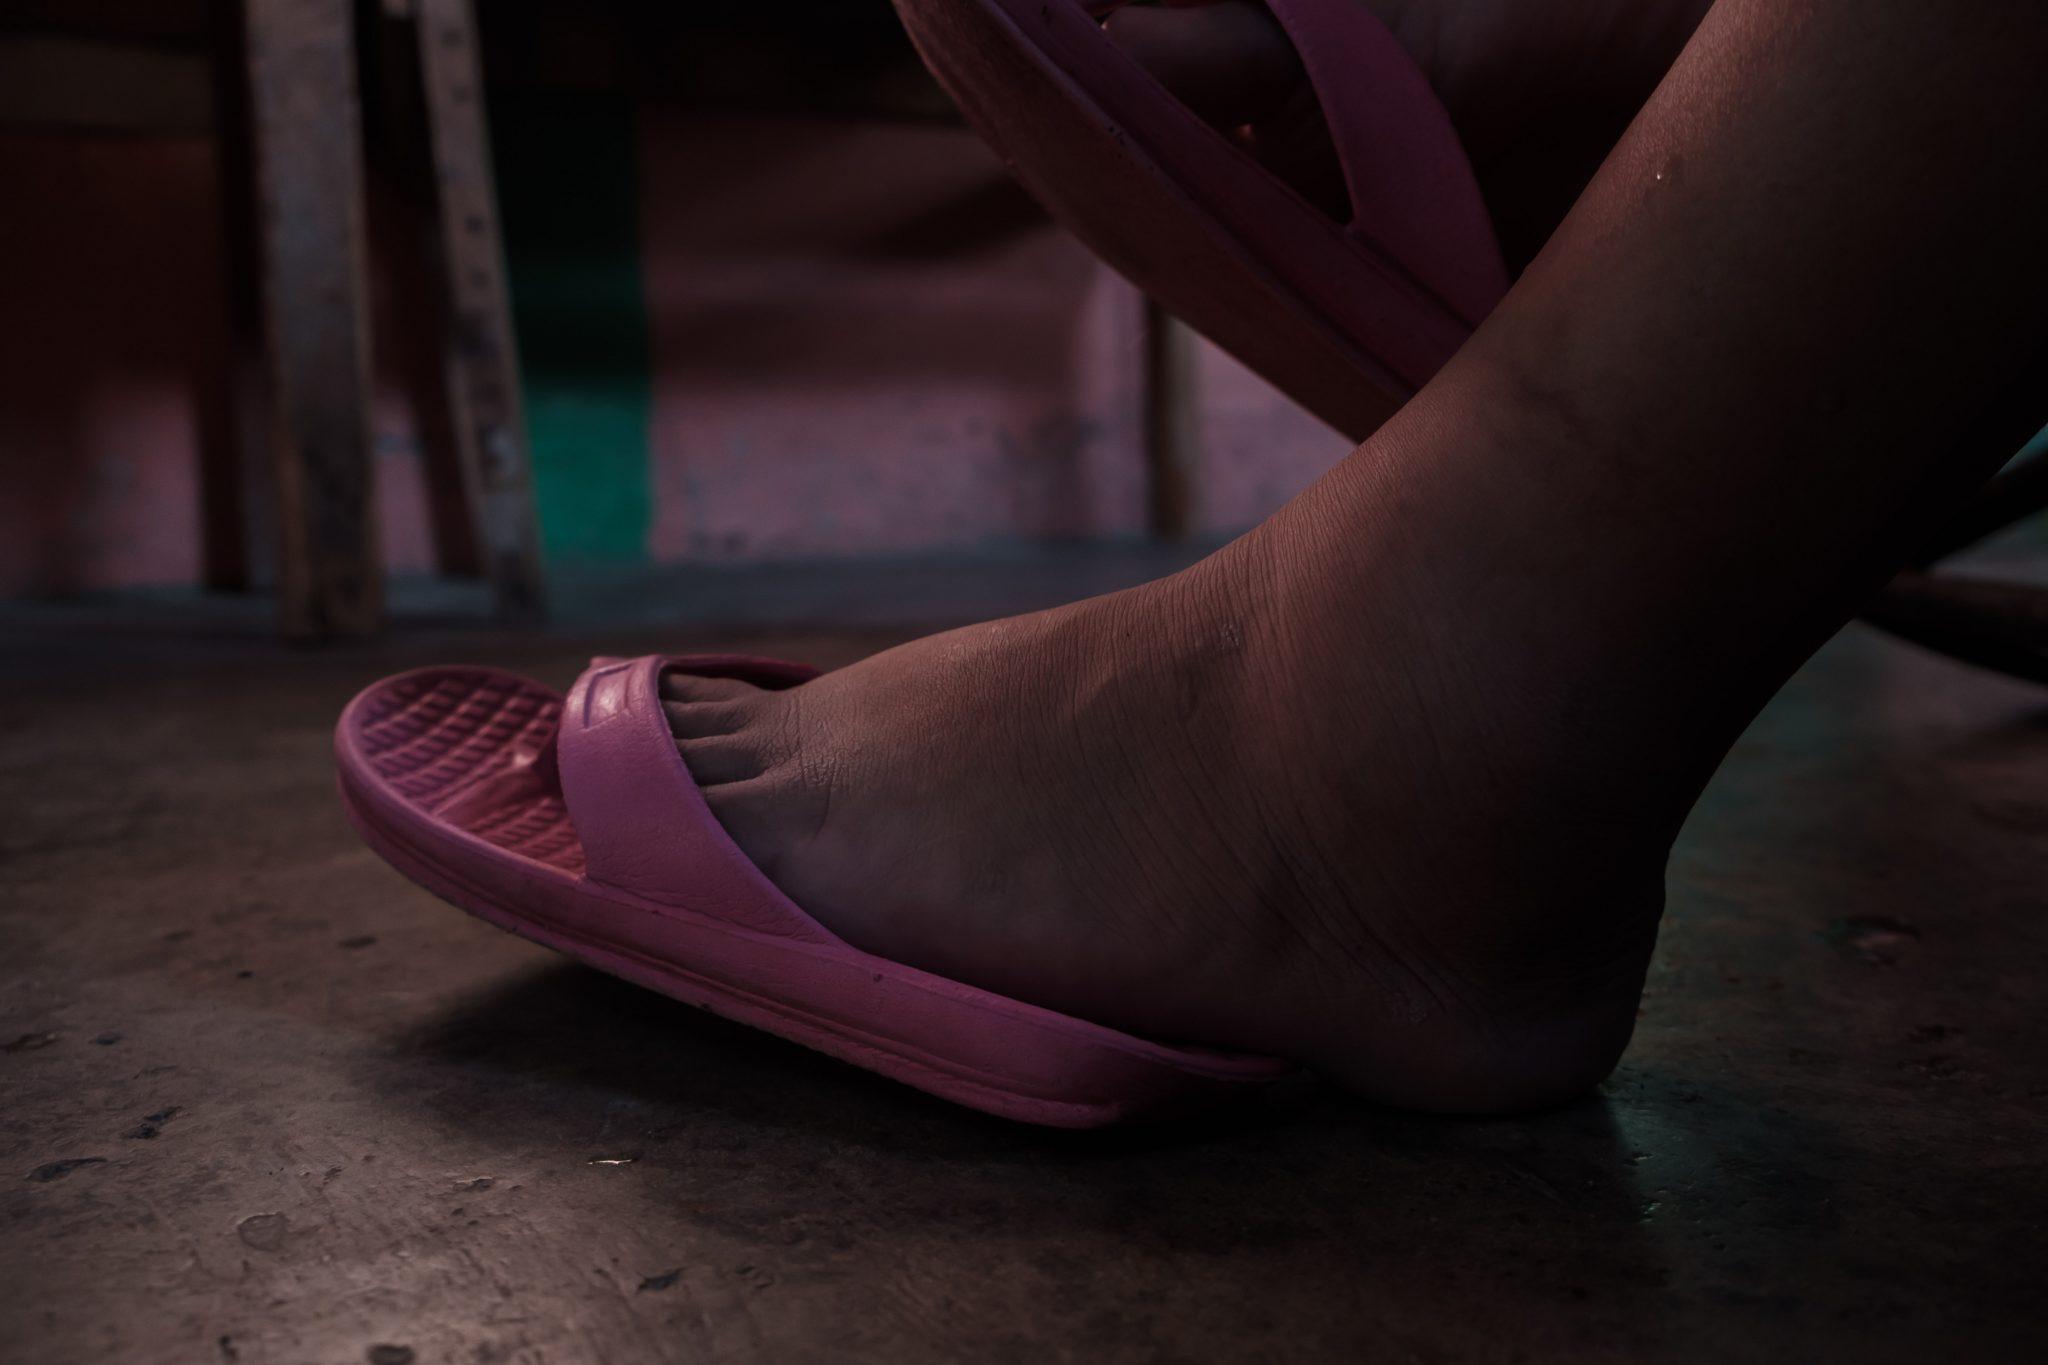 Cindy’s swollen ankle, sprained while trying to escape the tear gas. Photo:  Deiby Yánes /Contracorriente